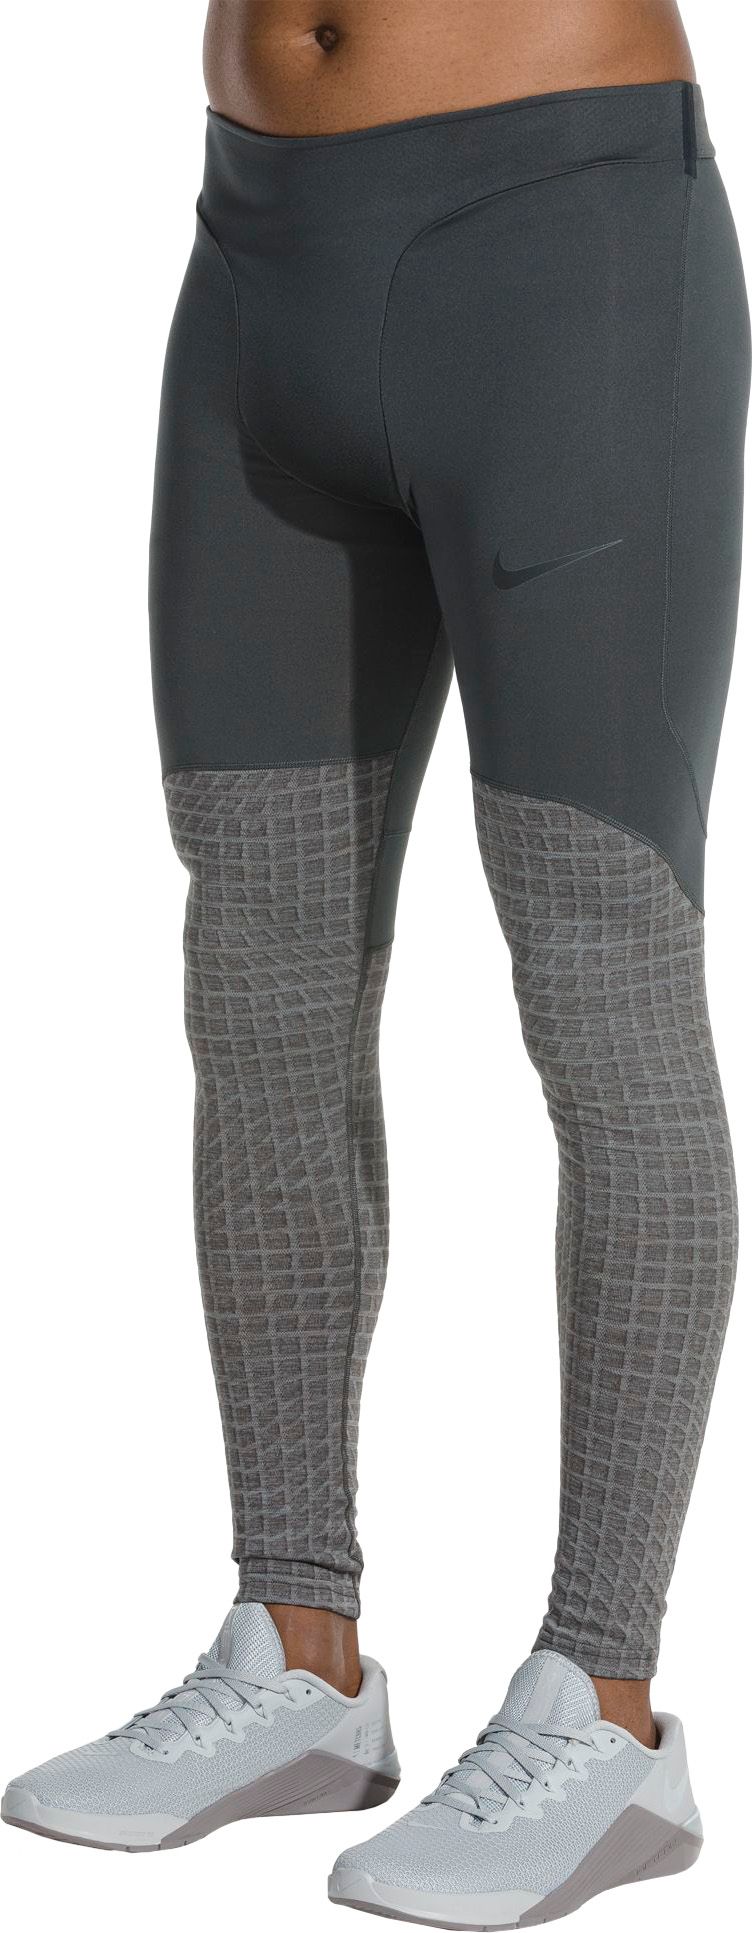 therma tights